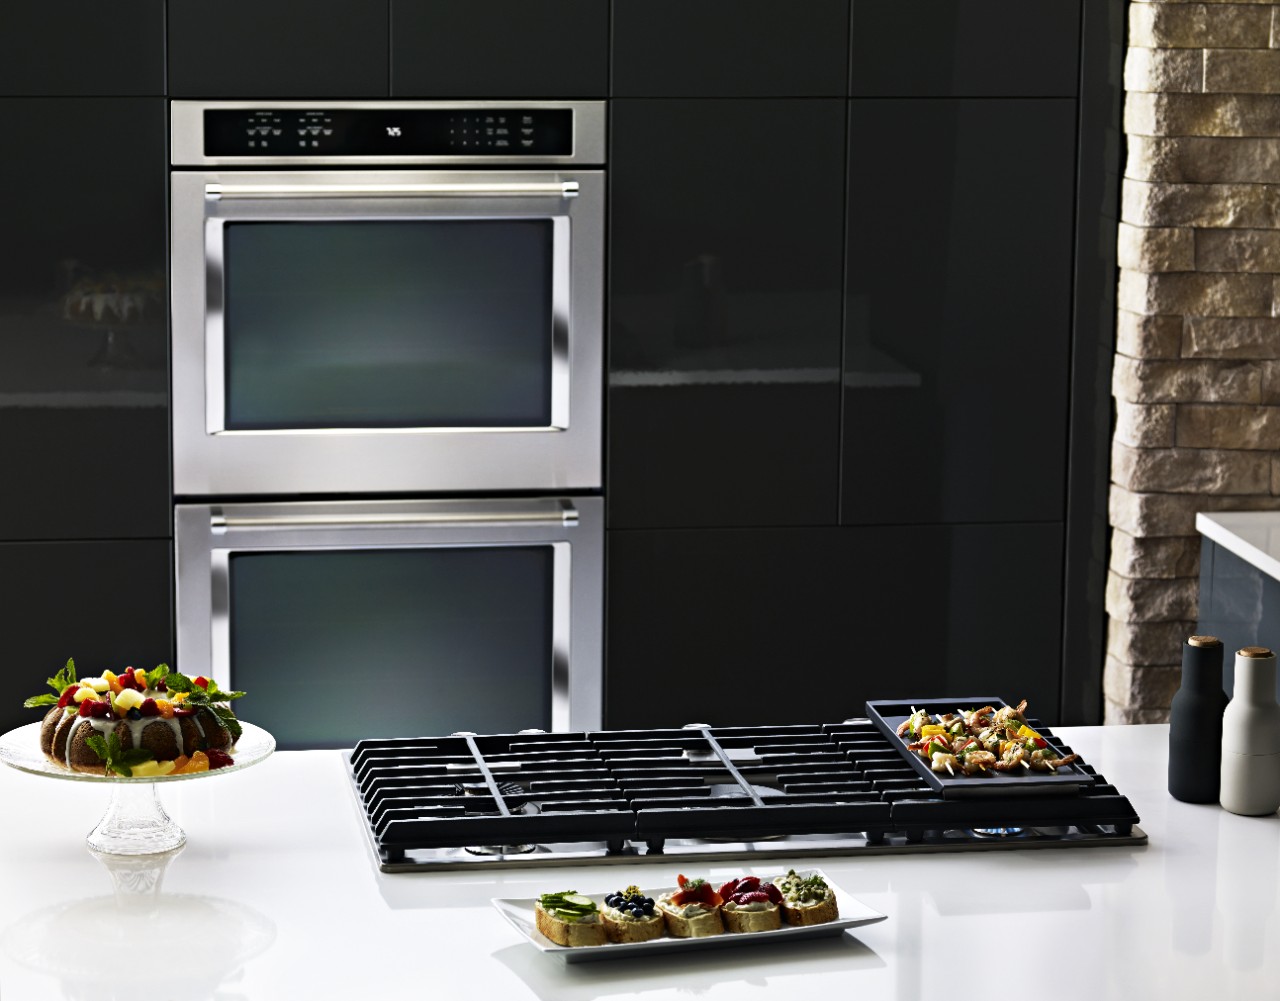 Browse all cooktop options from KitchenAid